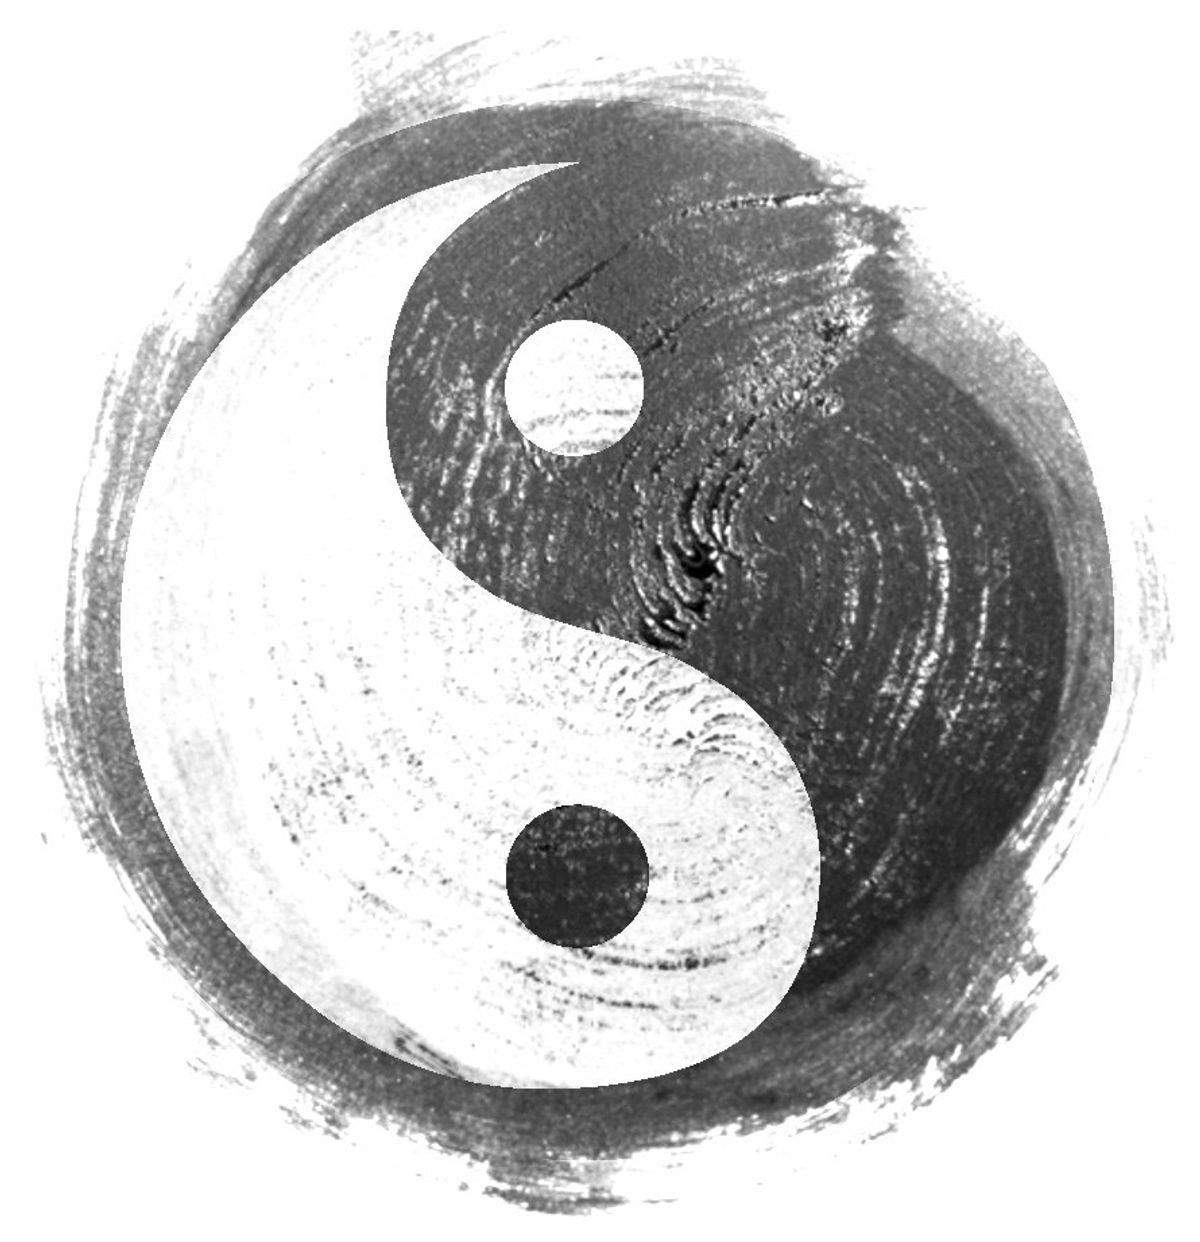 What Does It Mean To Practice Taoism in America?